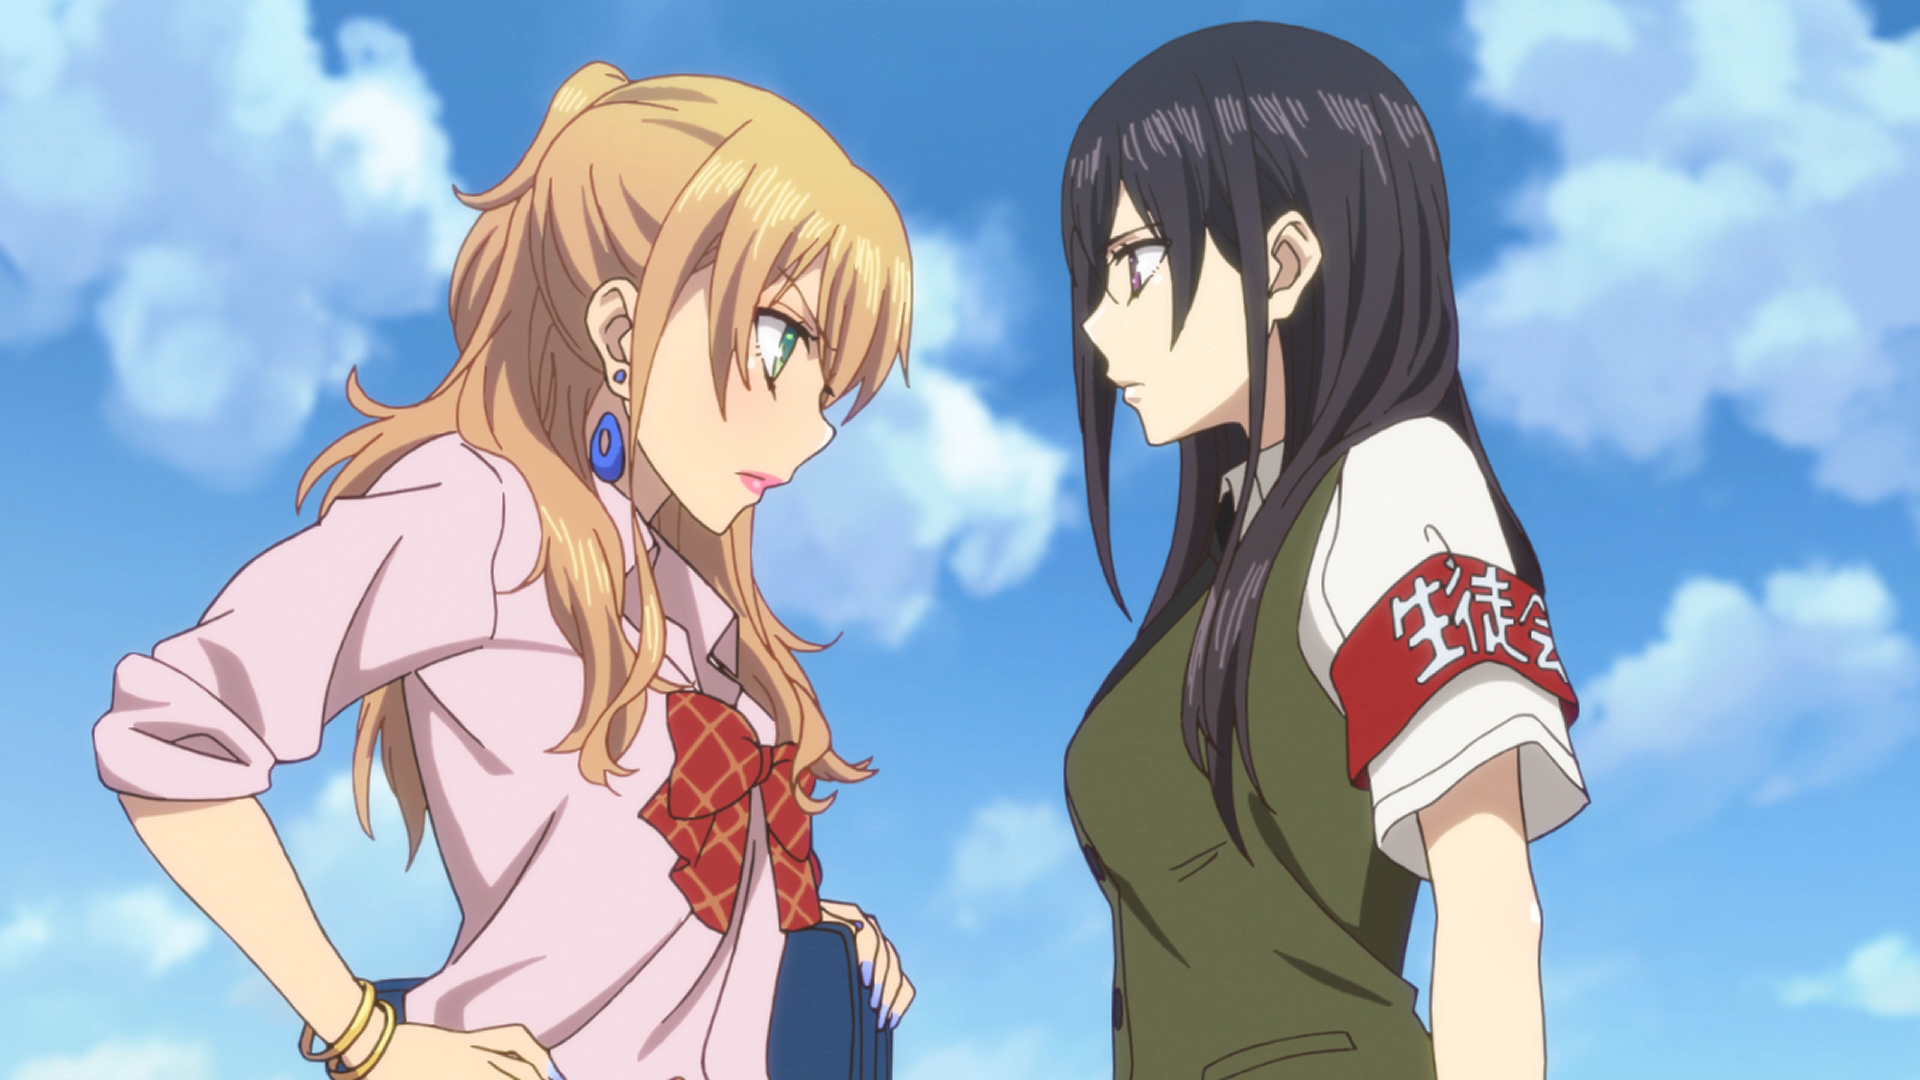 Citrus - The Winter 2018 Anime Preview Guide - Anime News Network